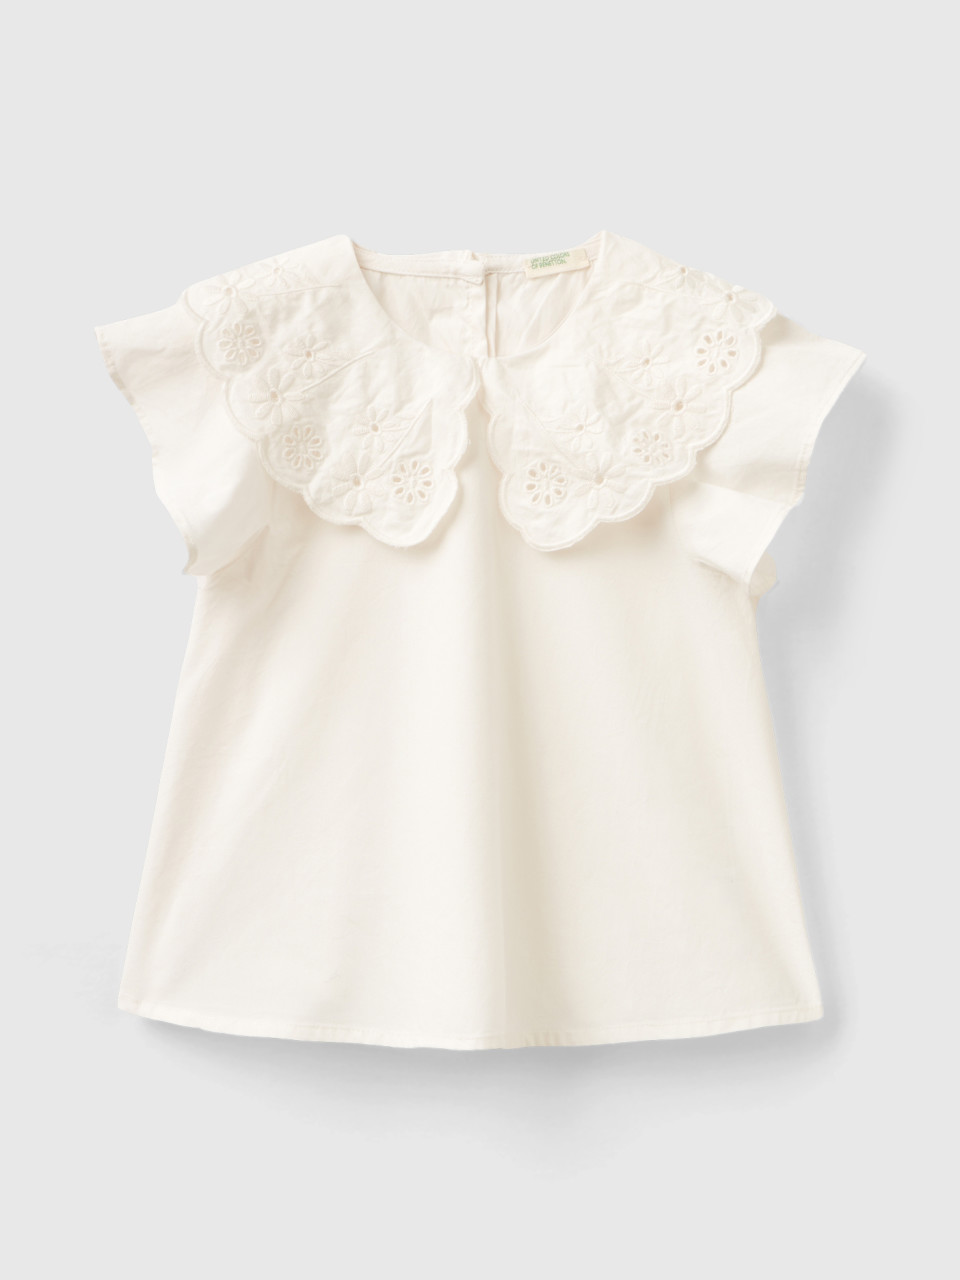 Benetton, Blouse With Embroidered Collar, Creamy White, Kids